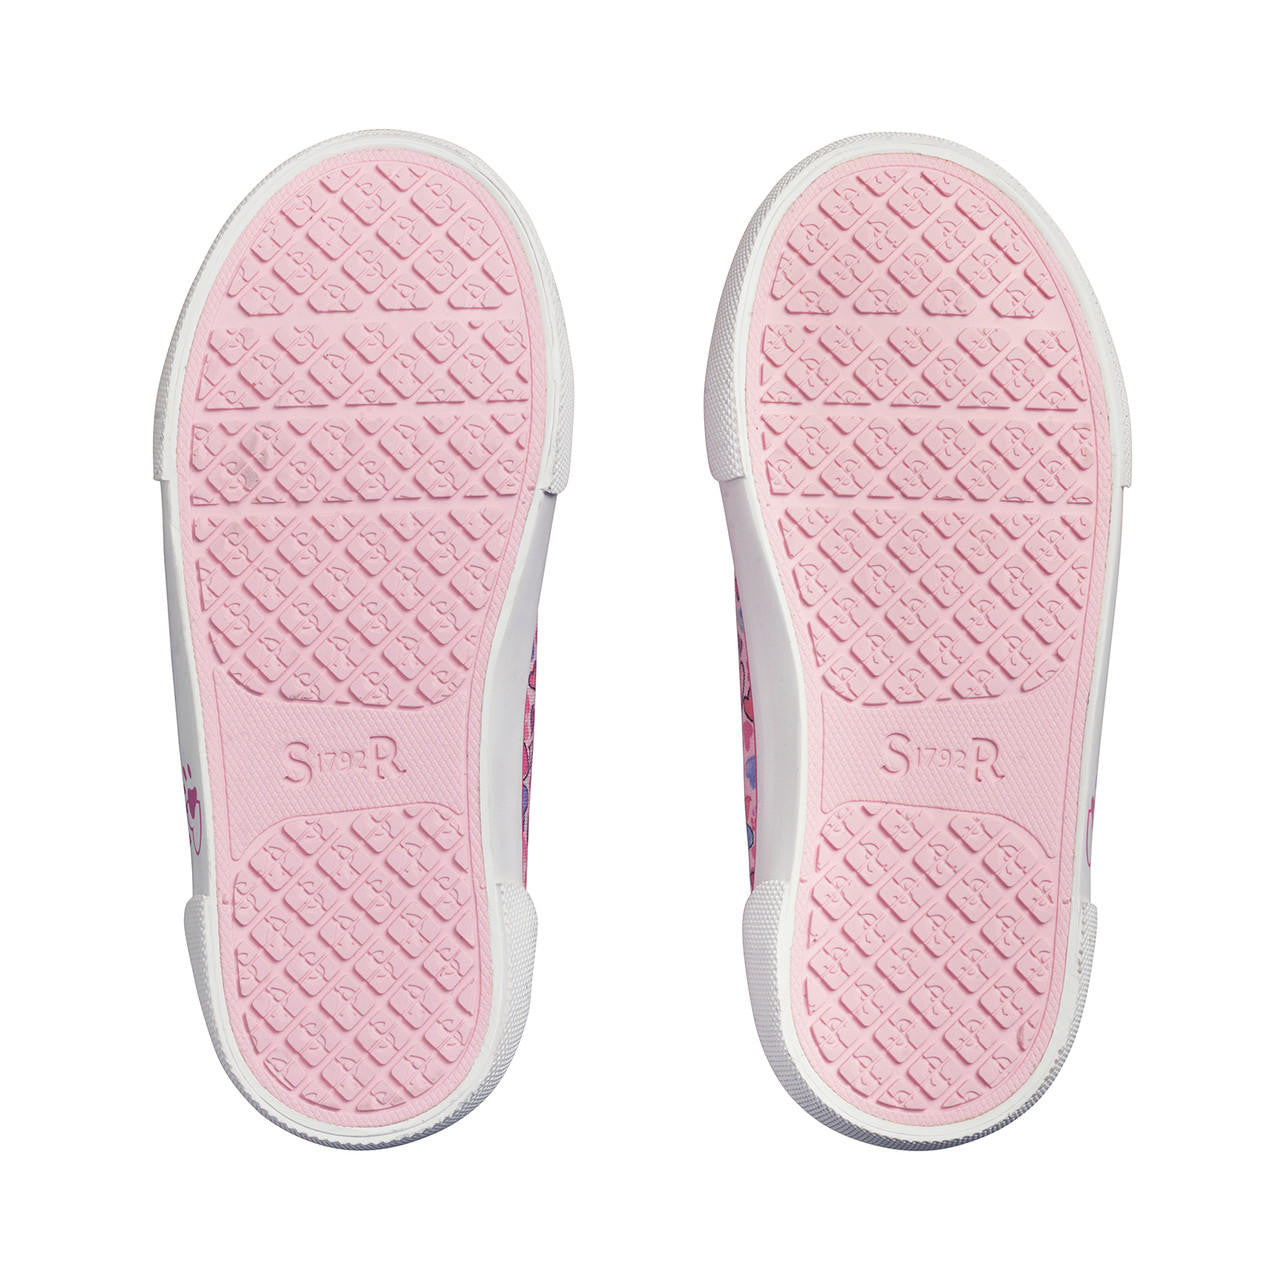 StartRite Loveheart 6193_6 Girls Pink Heart Textile Vegan Touch Fastening Shoes